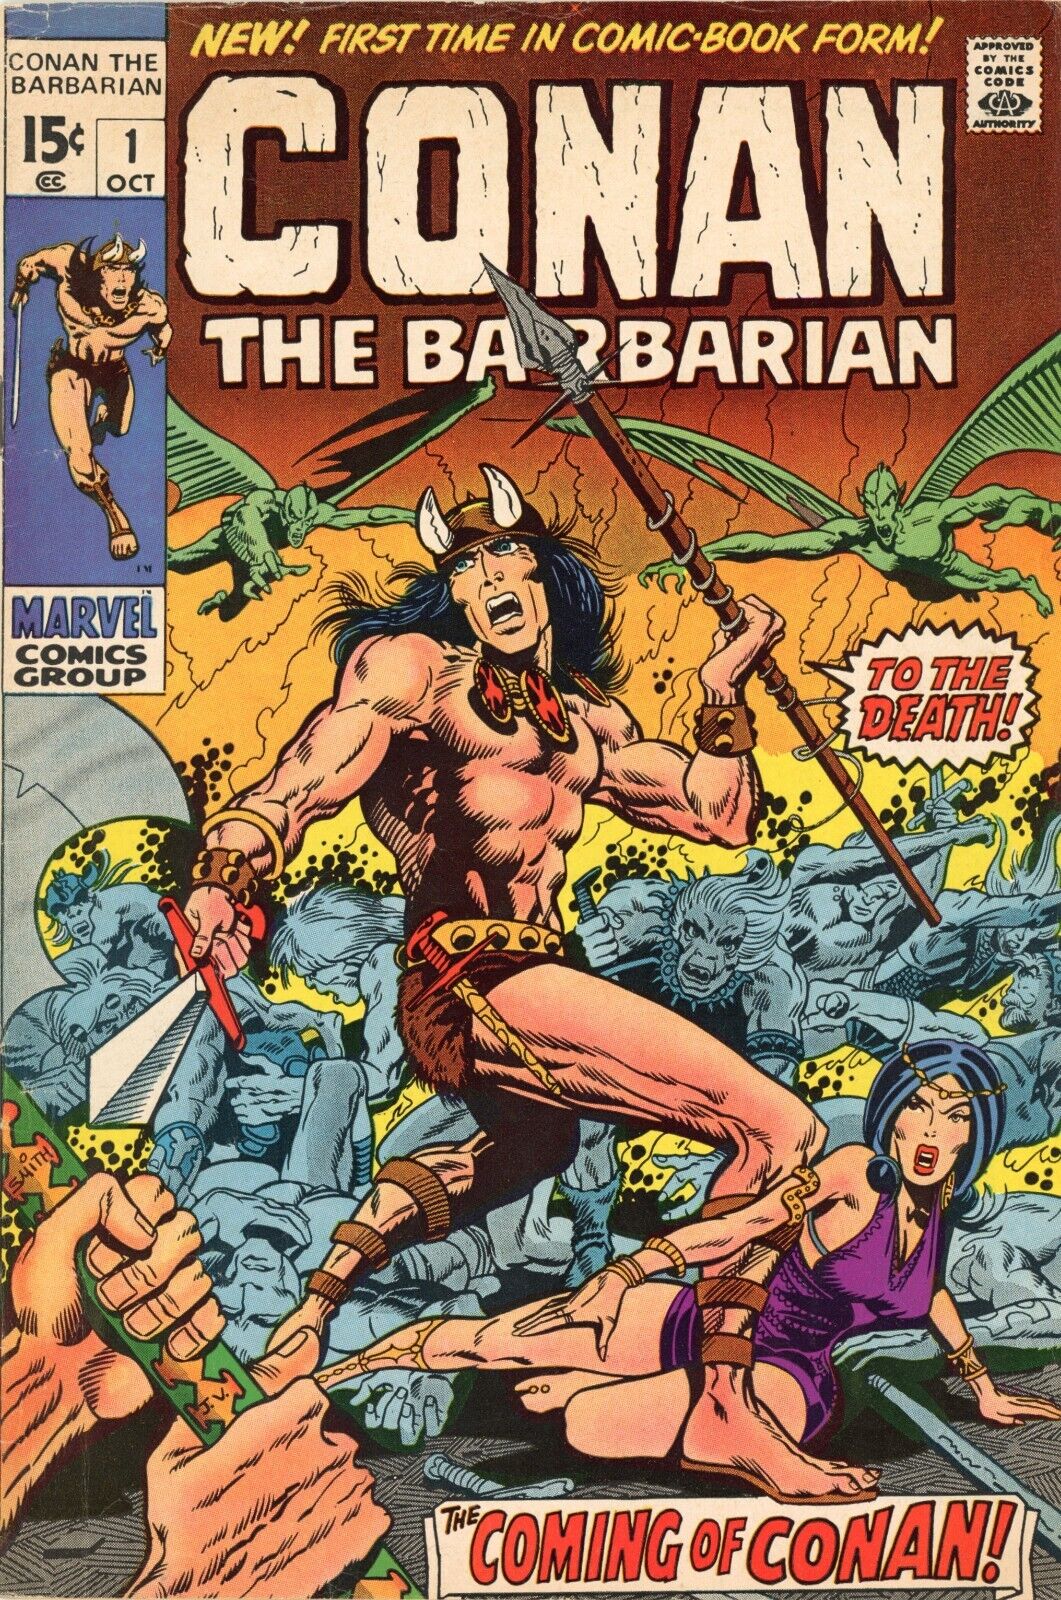 Conan the Barbarian #1 - First Appearance of Conan Marvel Comics 1970 GREAT COPY